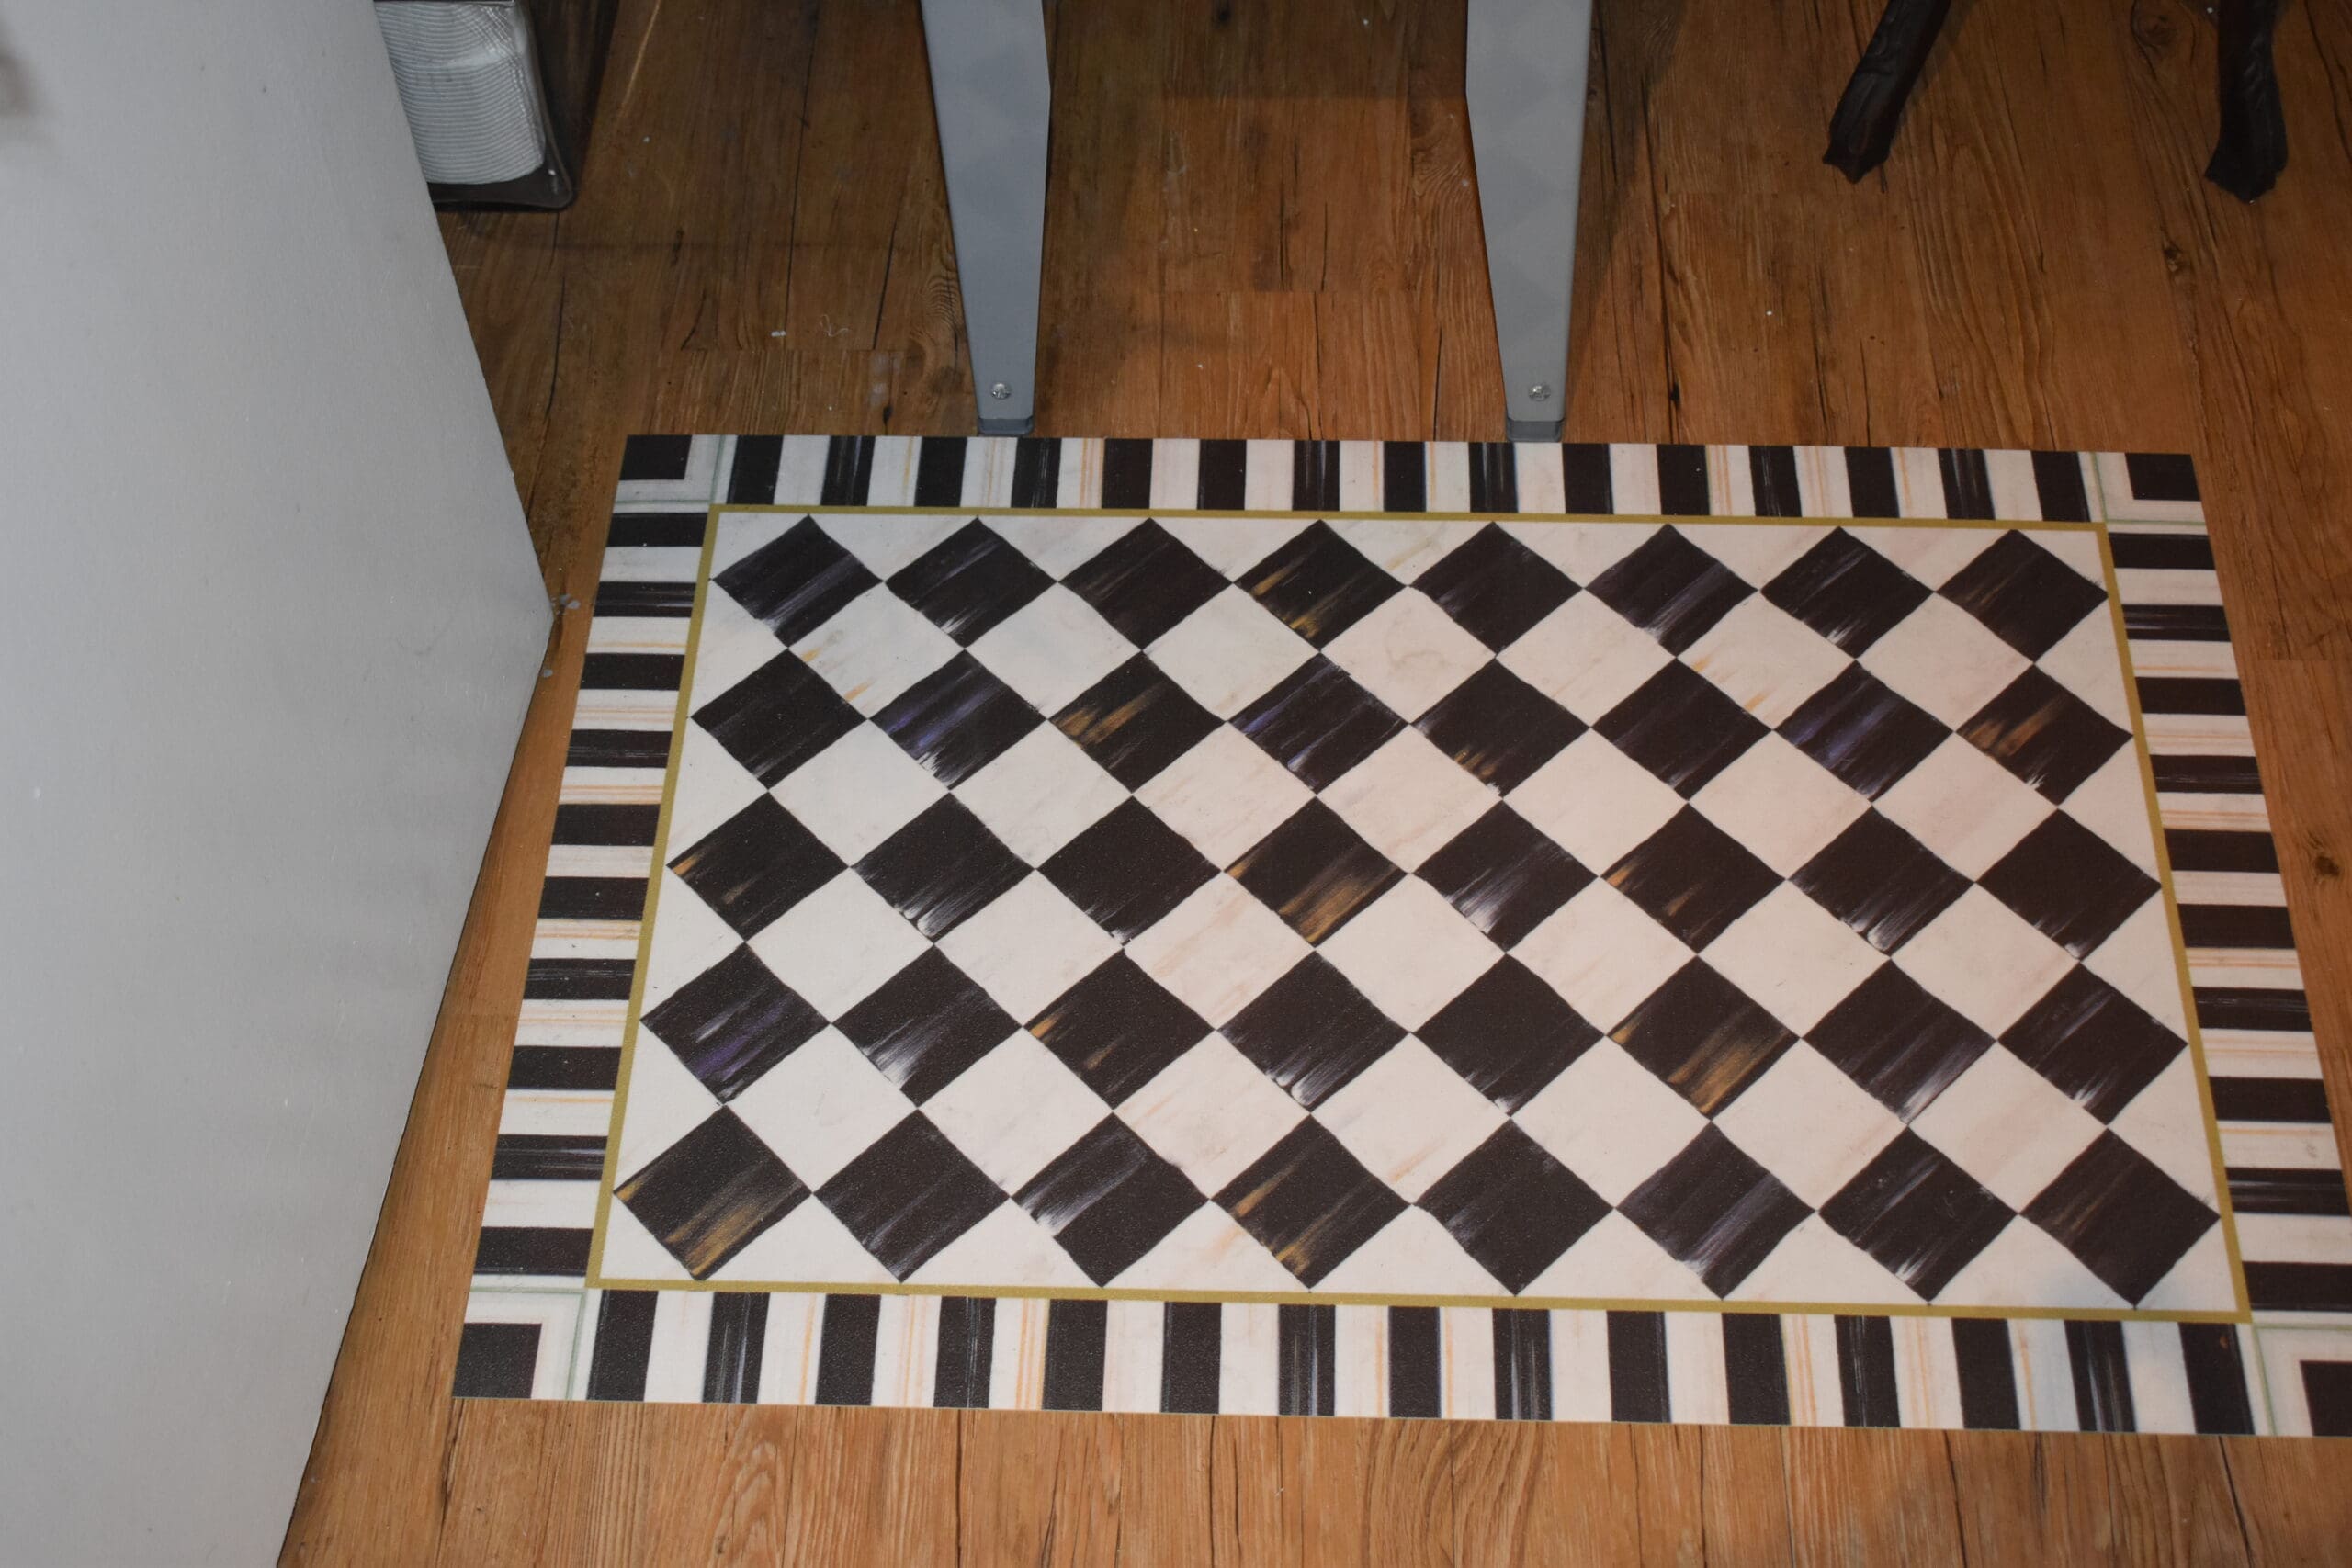 https://www.foundrhodeisland.com/wp-content/uploads/sites/27/2020/11/Courtly-Check-Floor-Mat-2-scaled.jpg